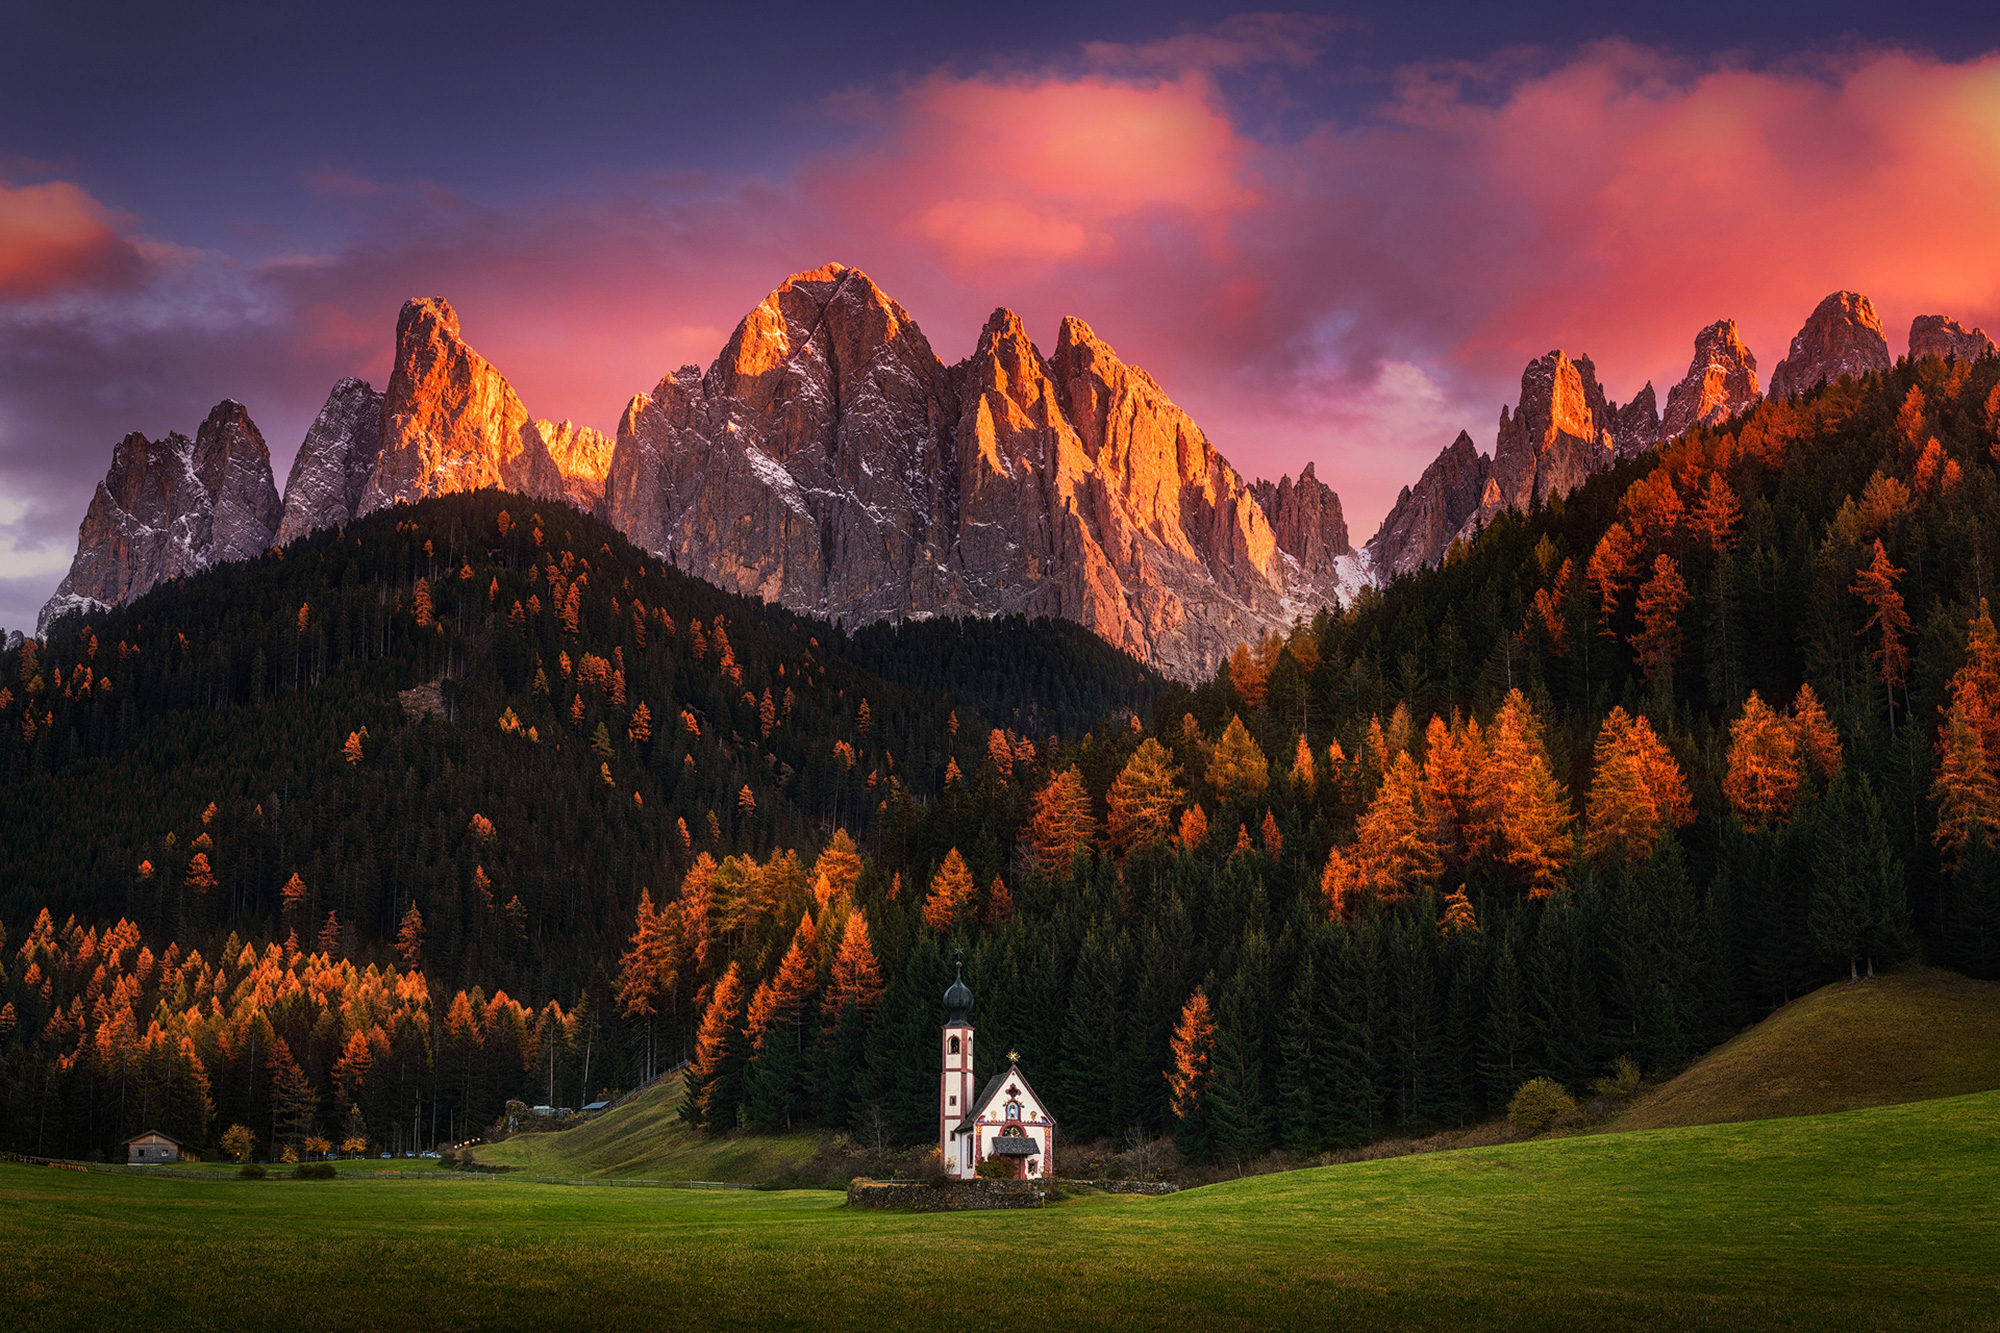 albert-dros-sony-alpha-7RII-a-small-church-sits-in-the-shadow-of-a-mountain-with-the-peaks-illuminated-in-golden-orange.jpeg